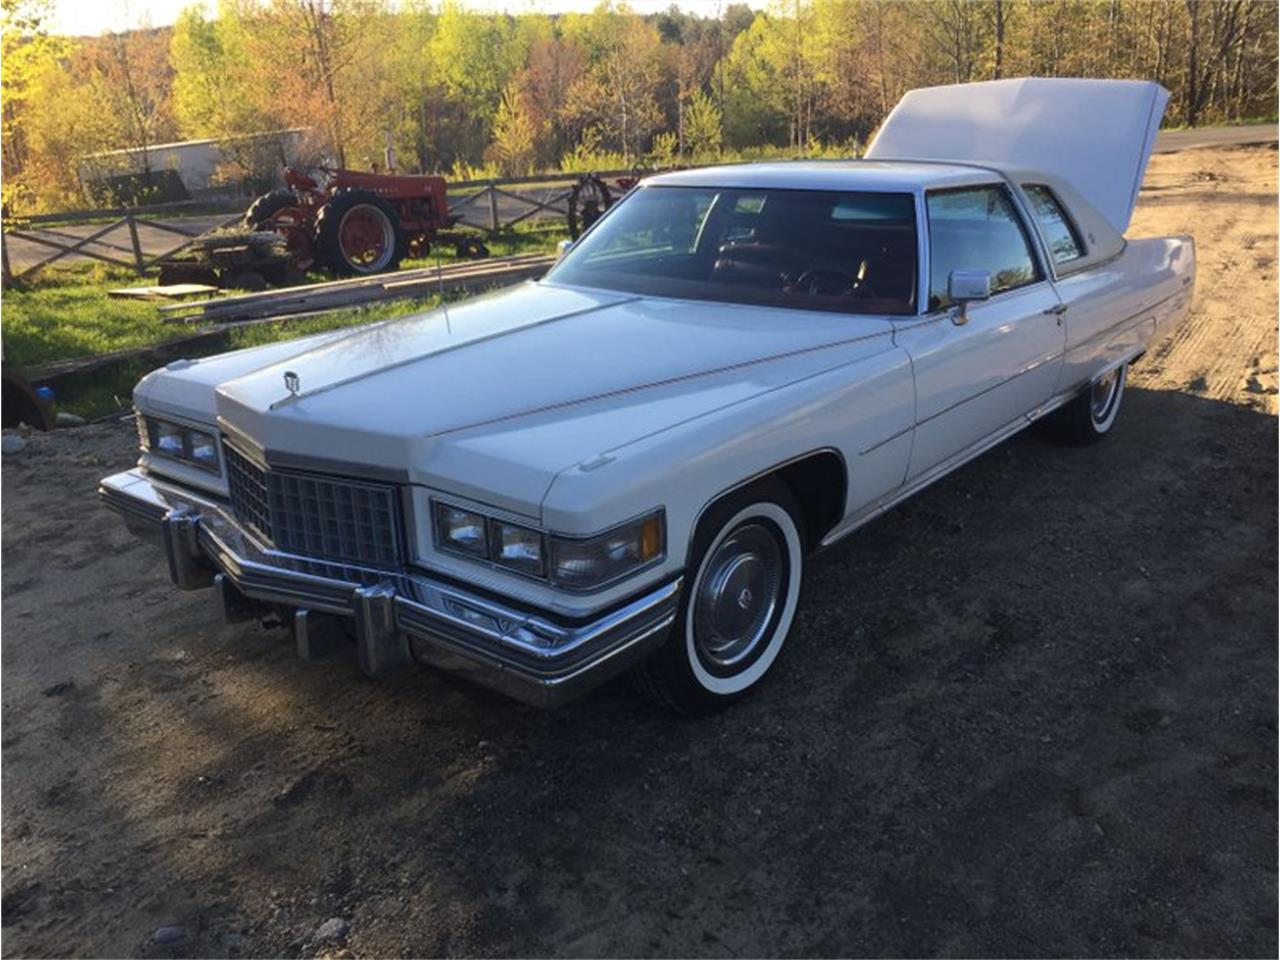 For Sale at Auction: 1976 Cadillac Coupe for sale in Saratoga Springs, NY